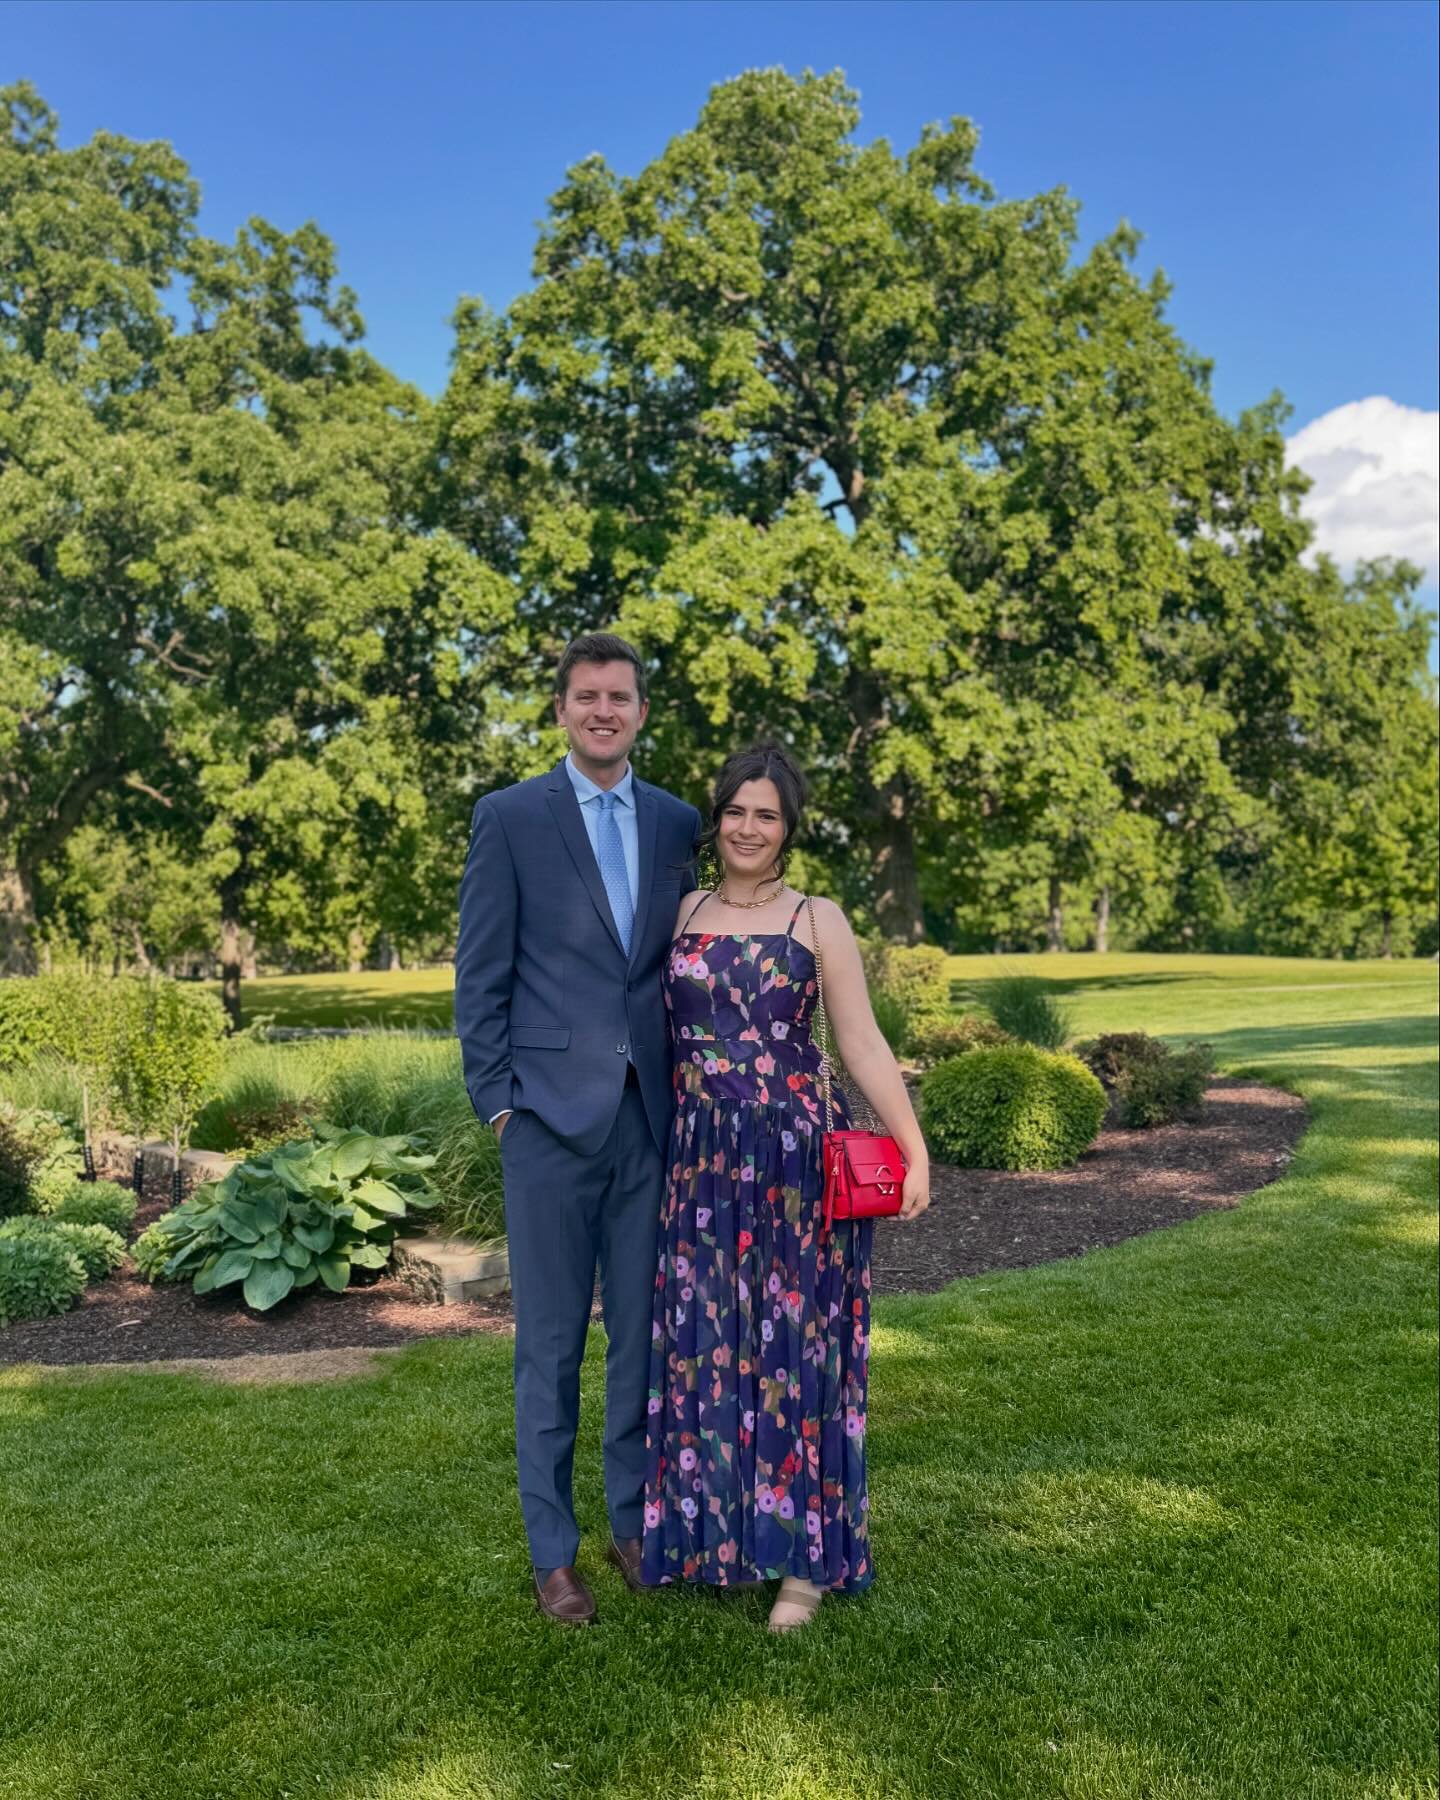 A family-filled weekend celebrating @rod.erick614 &amp; my cousin @meaghanangela27 🎉🫶🏻💃🏻✨💍 the vows and toasts had me in my feels. 🥰 Truly such a beautiful day and so grateful to be a part of it! Cheers to forever 🥂

#stylebyausten #chicagowe